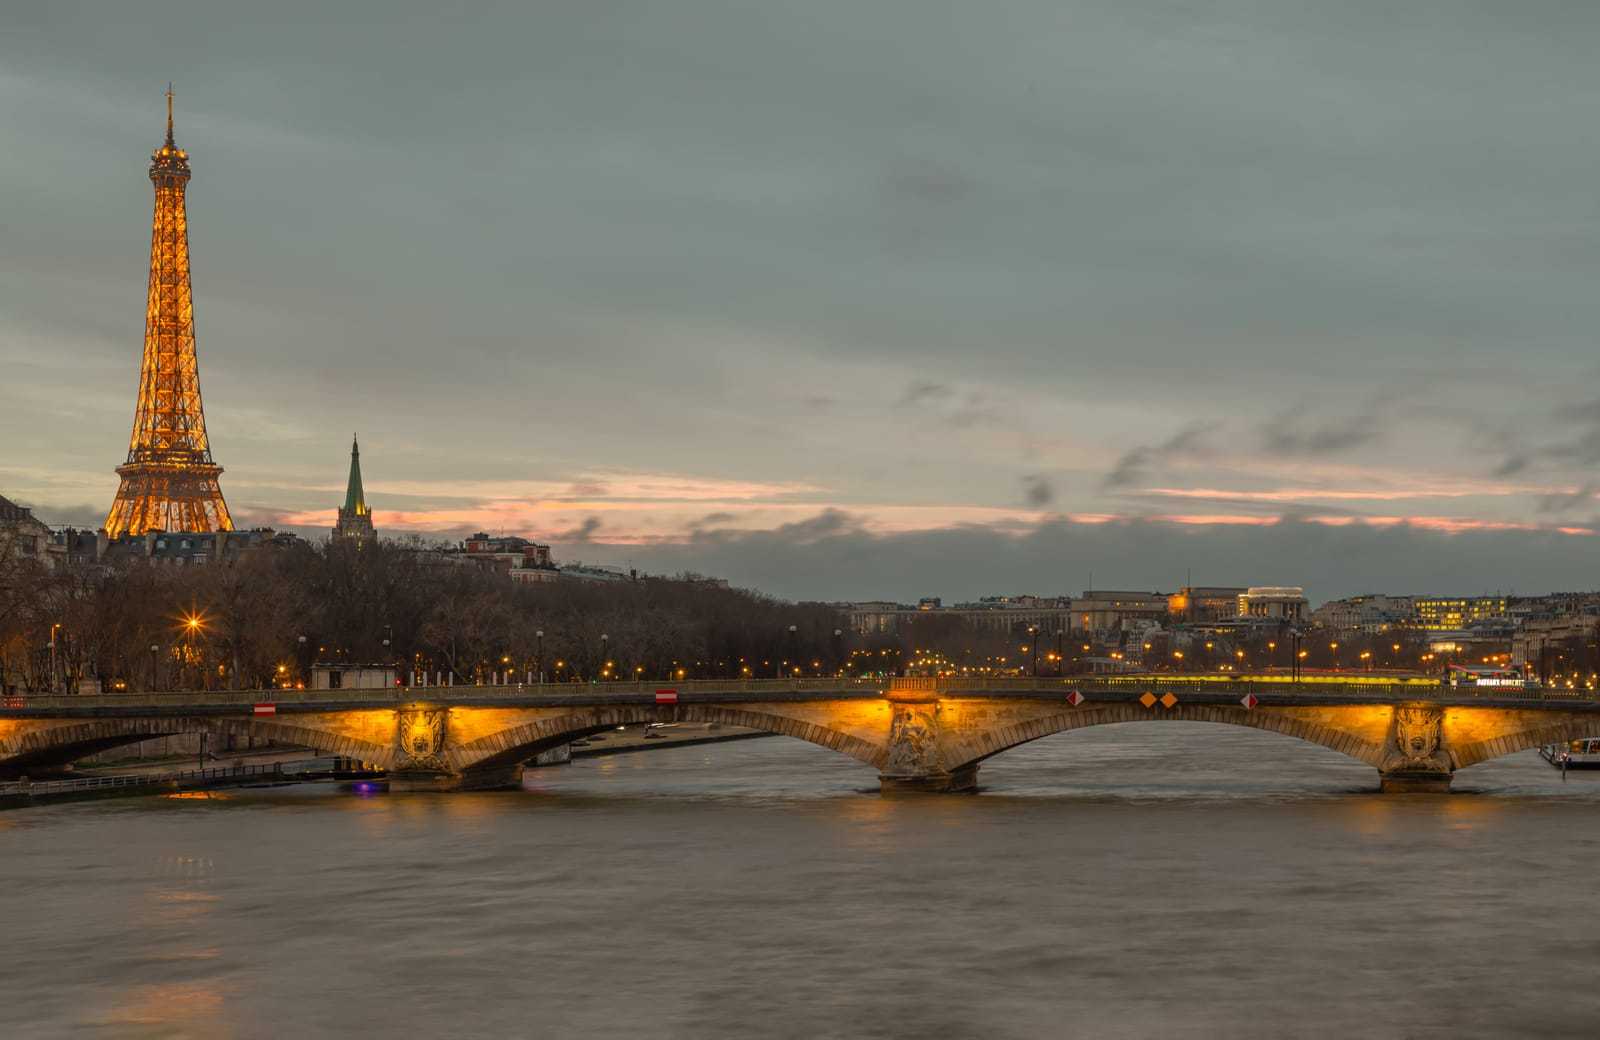 Seine Cruise from the Eiffel Tower - All about the most popular cruise in Paris